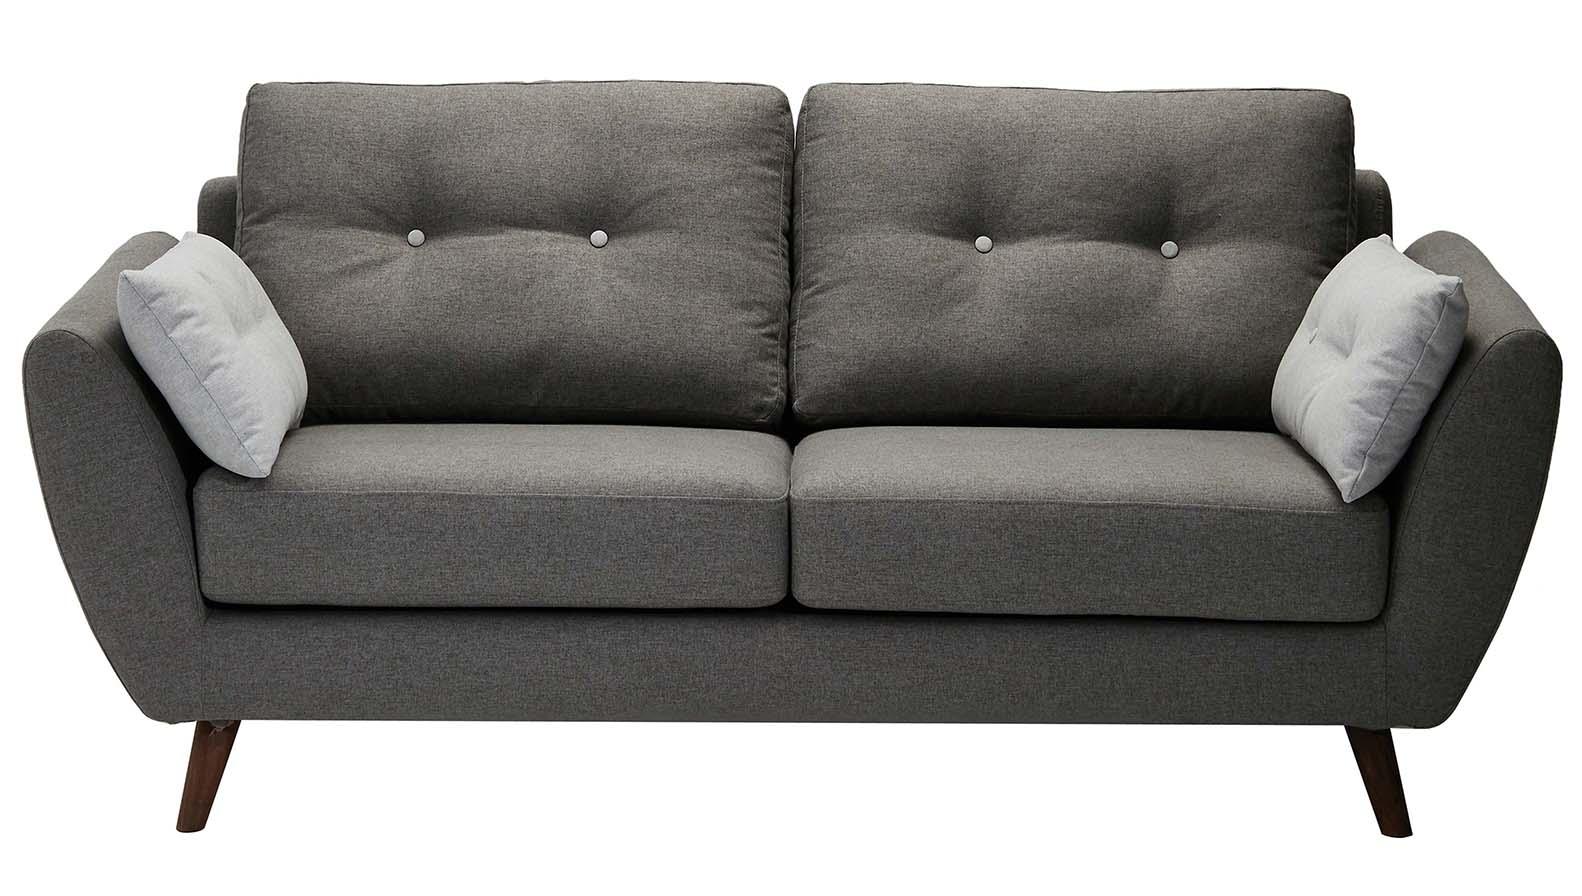 

    
ESF 707 Modern Chic Grey Fabric Living Room Sofa Loveseat and Chair Set 3Pcs
